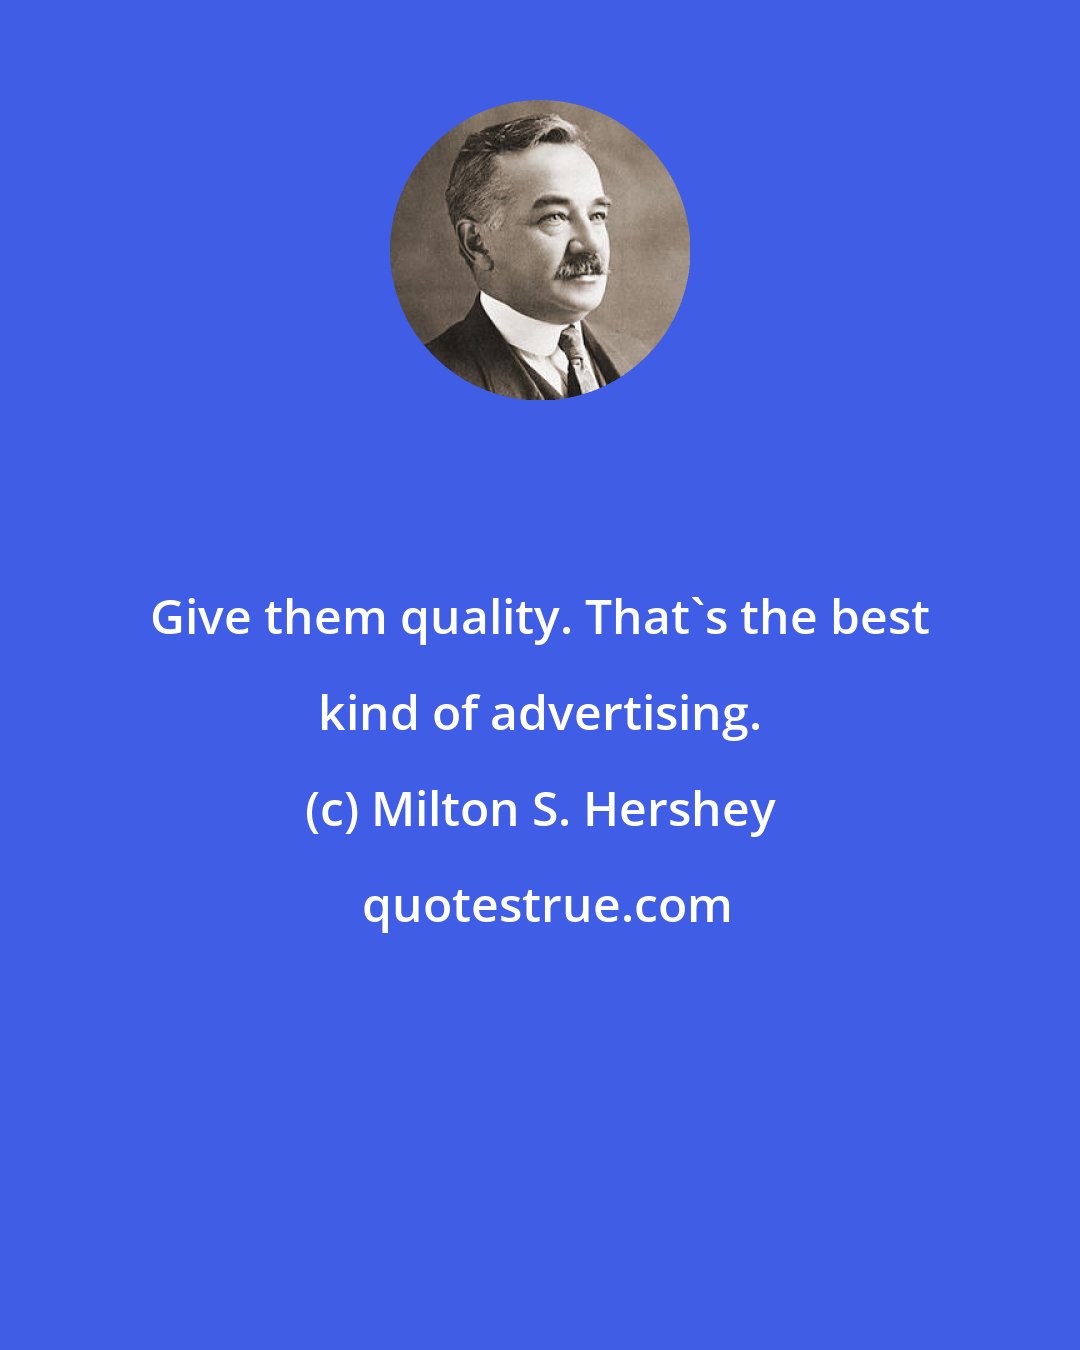 Milton S. Hershey: Give them quality. That's the best kind of advertising.